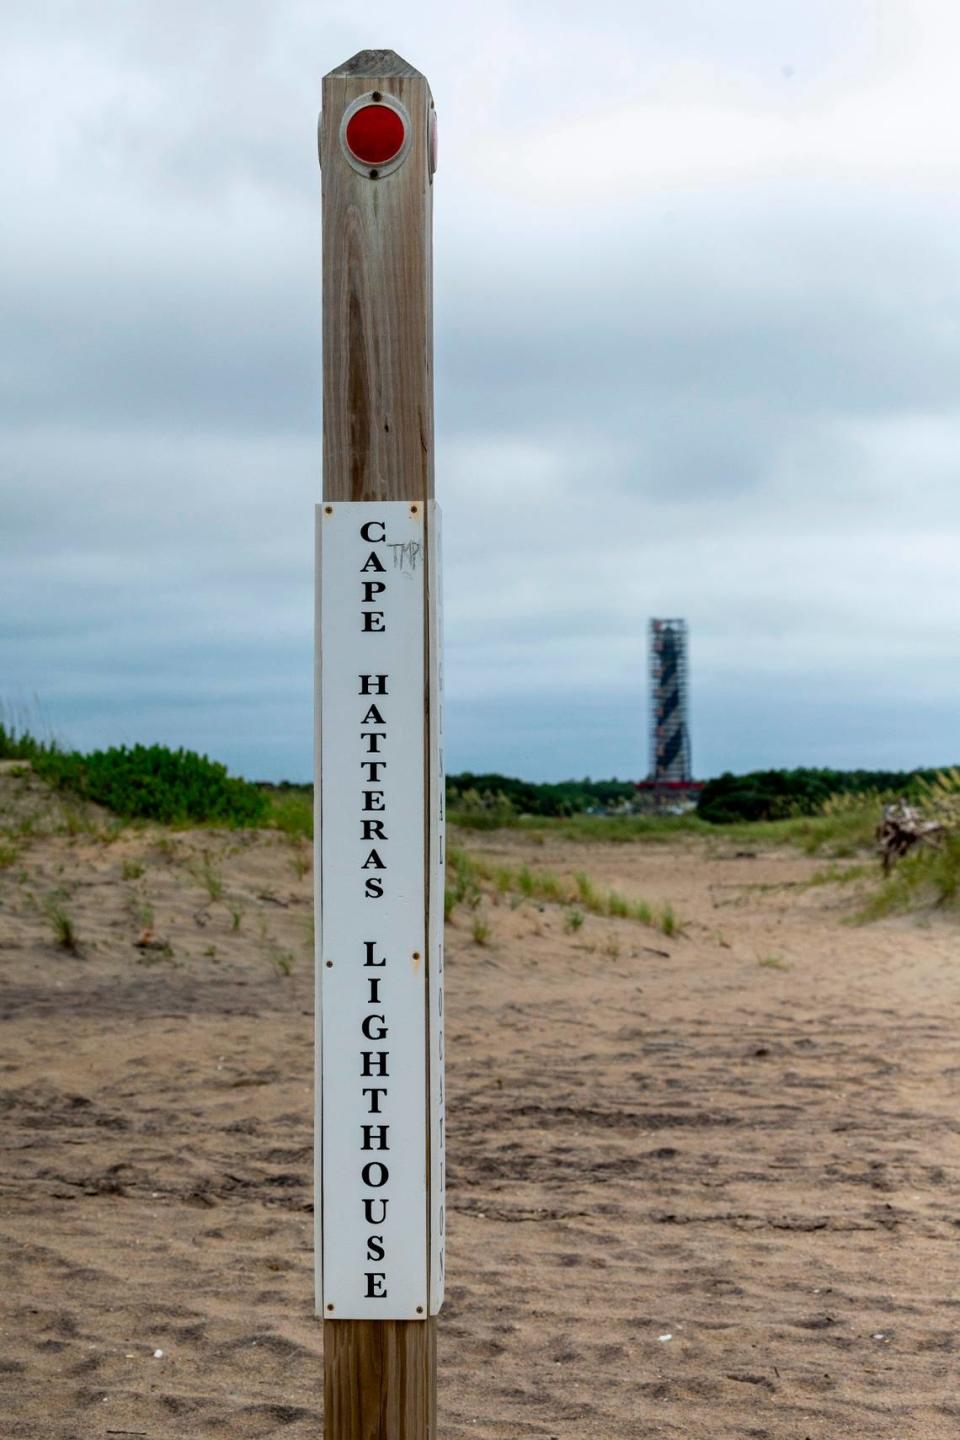 A post shows the original location of the Cape Hatteras Lighthouse. The lighthouse was famously moved over 23 days in June and July 1999, when it was cut from its granite foundation, lifted onto rails and rolled 2,900 feet inland.